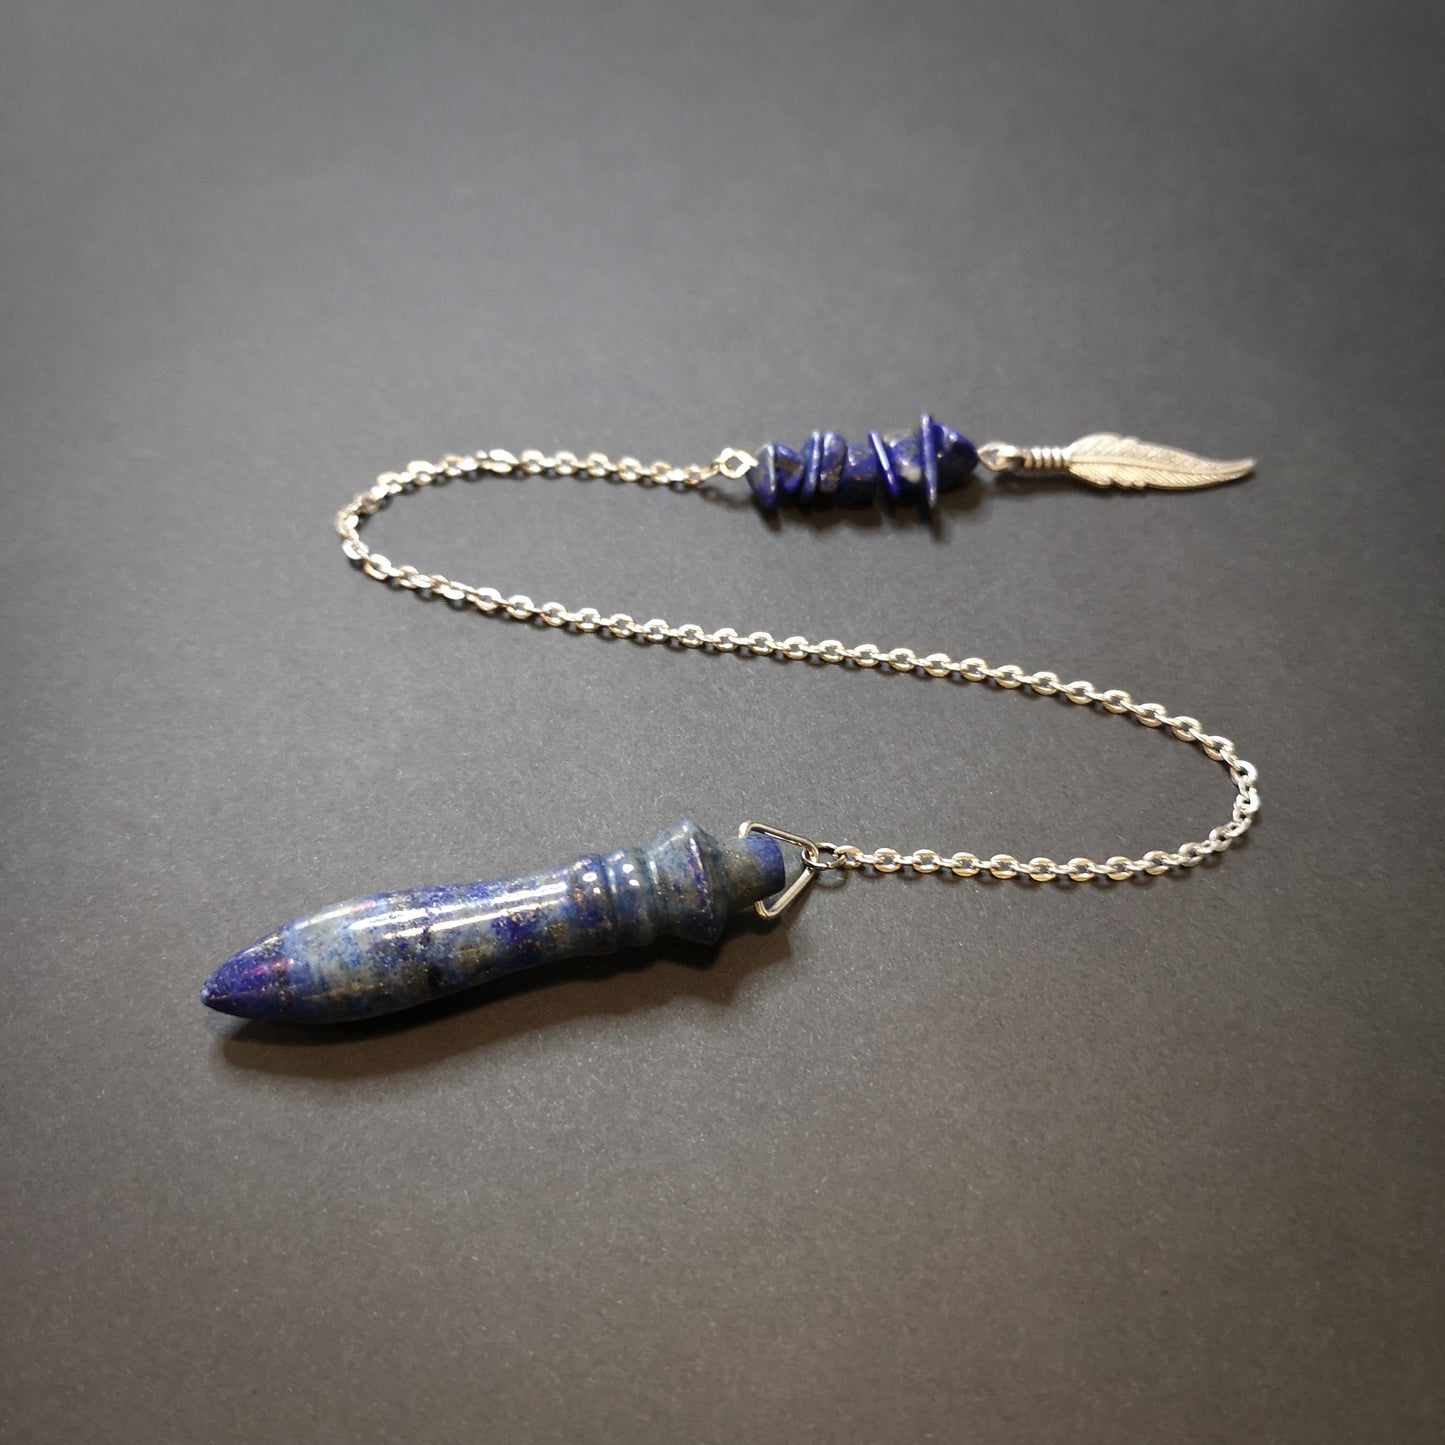 Egyptian Thot pendulum lapis lazuli and feather - The French Witch shop